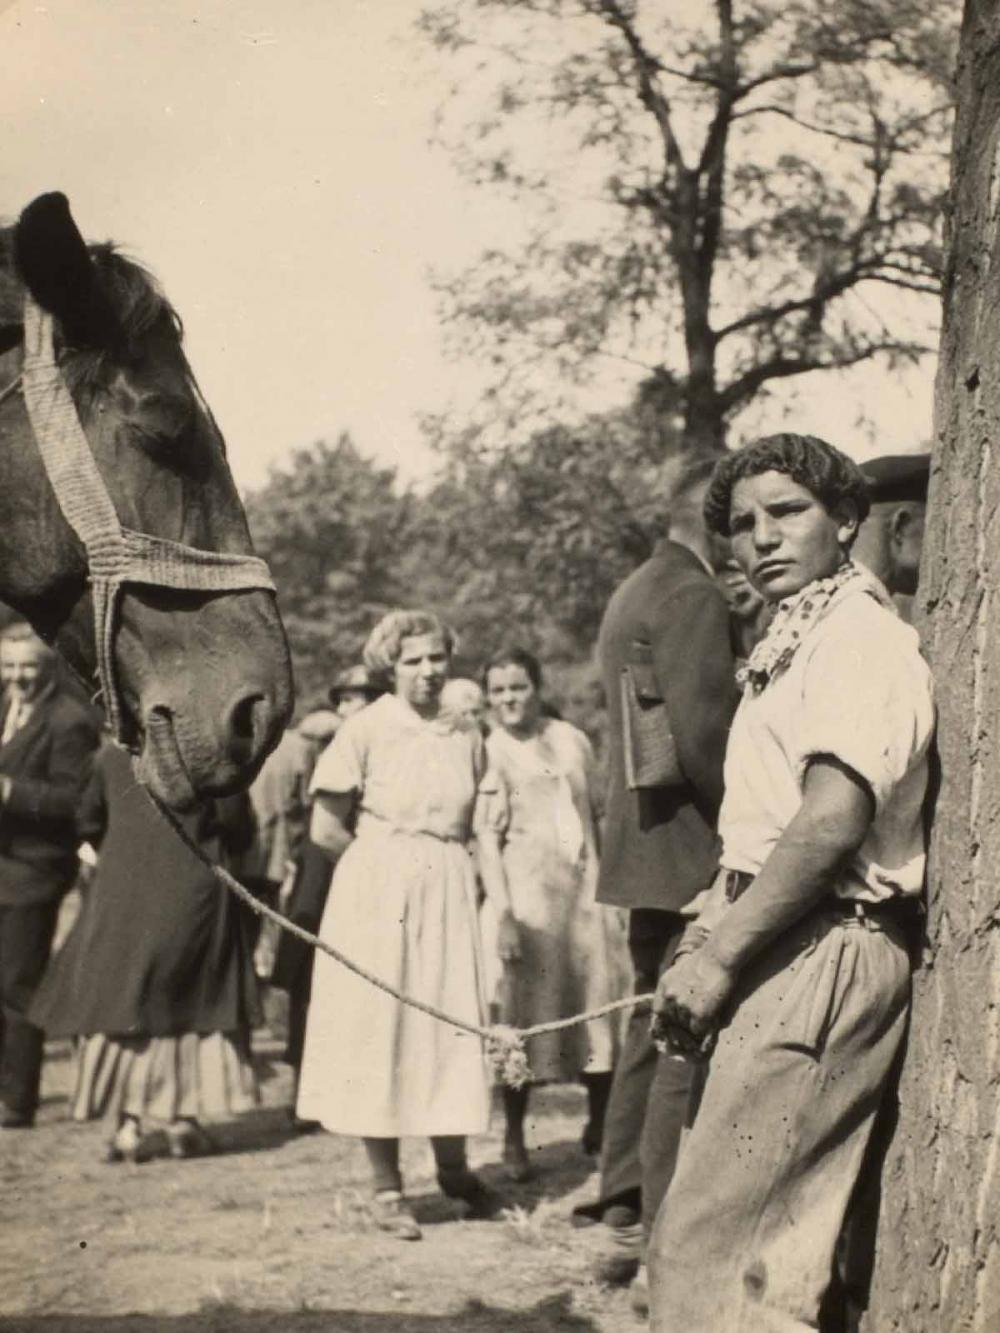 German horse fair, 1935. Liverpool University Library Special Collections